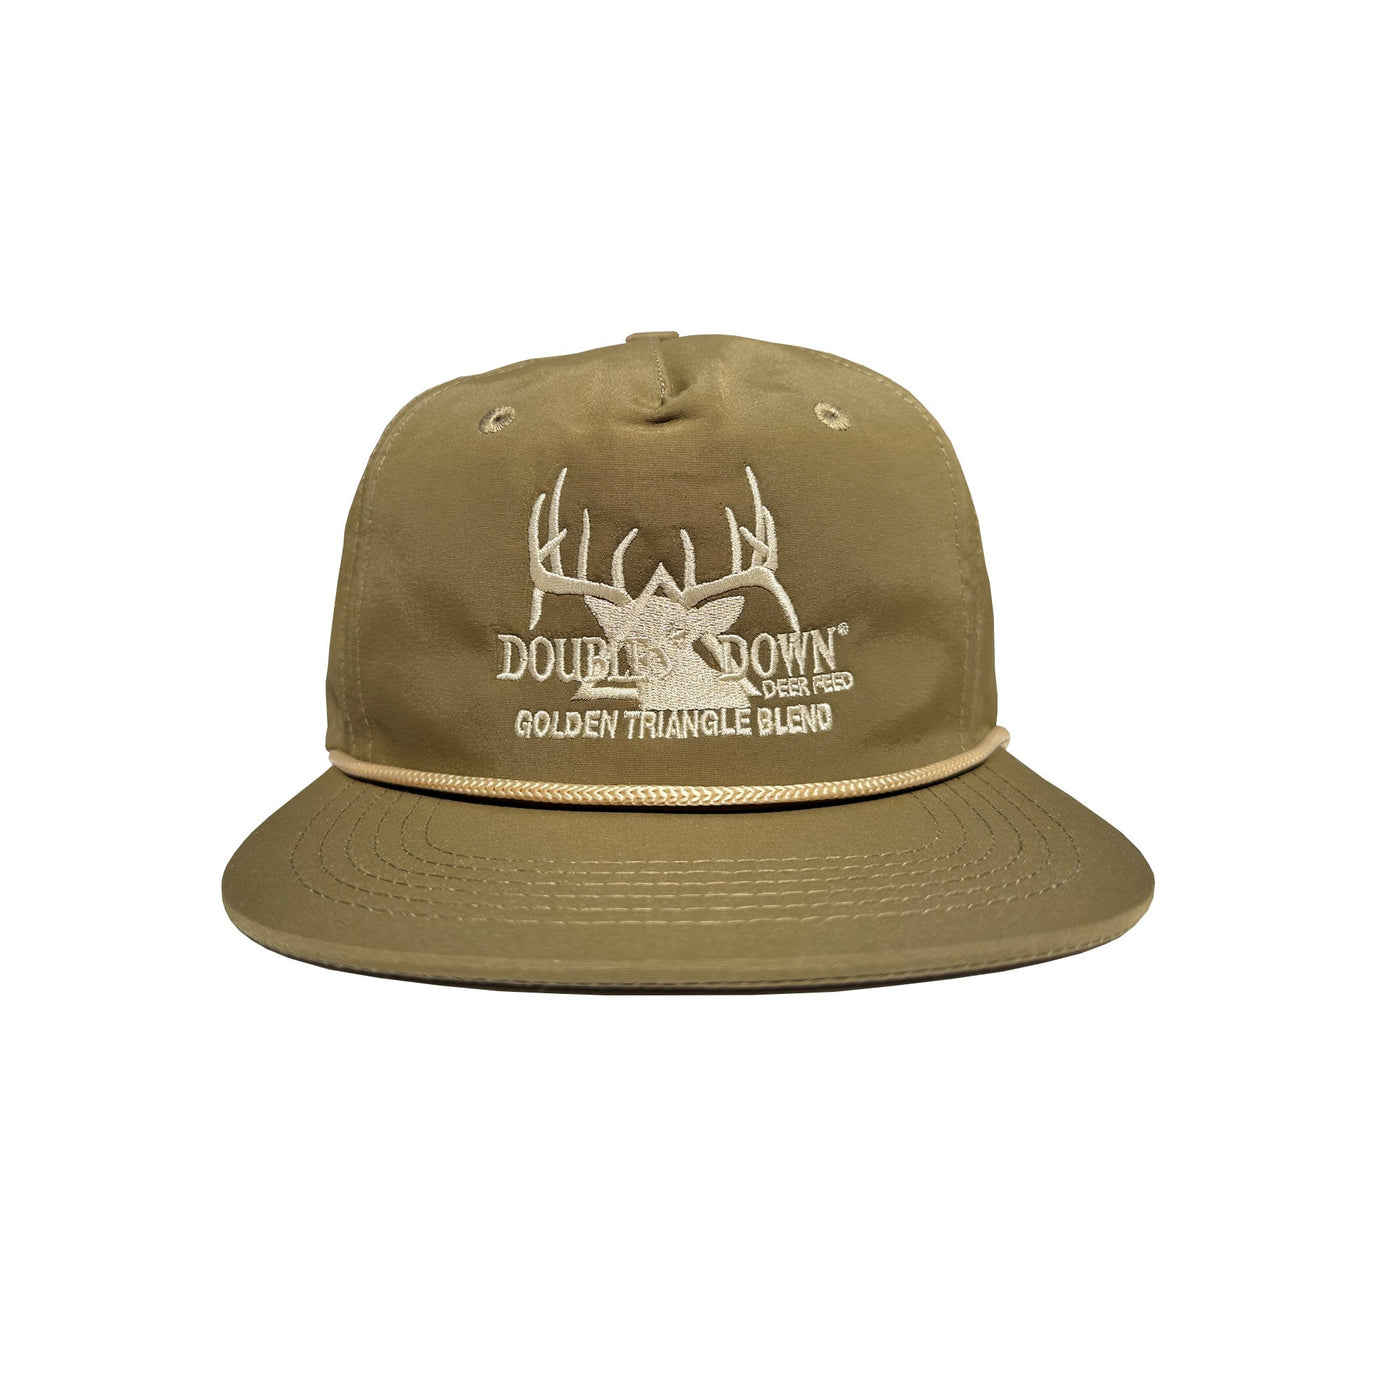 Double Down Branded Rope Hat